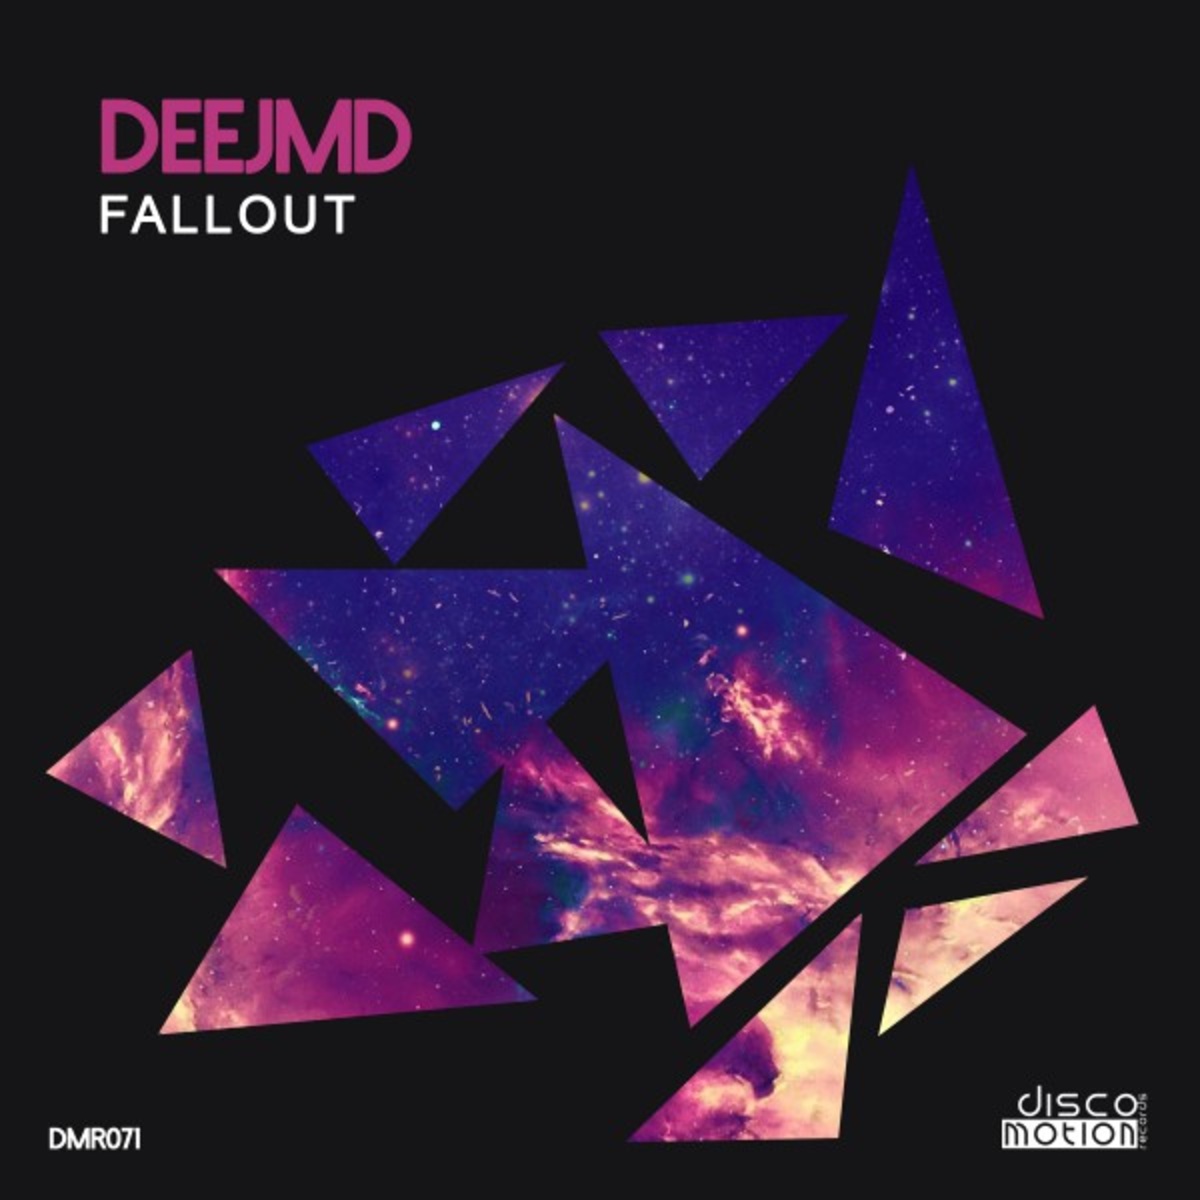 DeeJMD - Fallout / Disco Motion Records